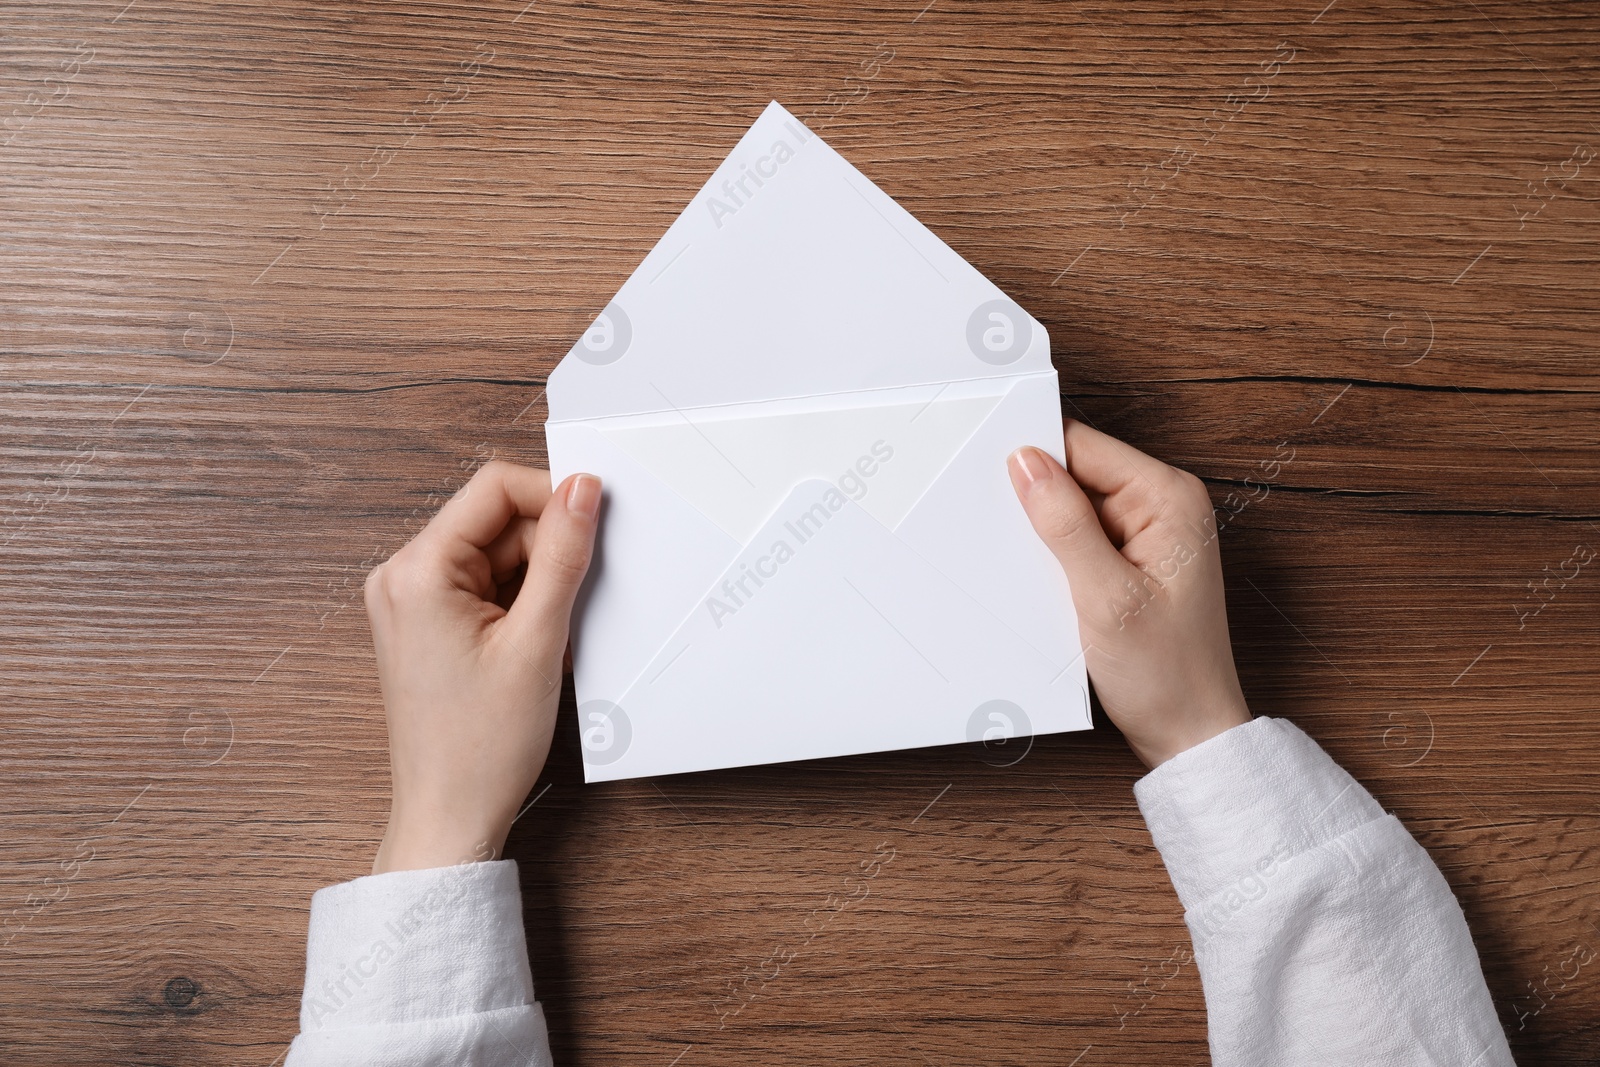 Photo of Woman holding letter envelope with card at wooden table, top view